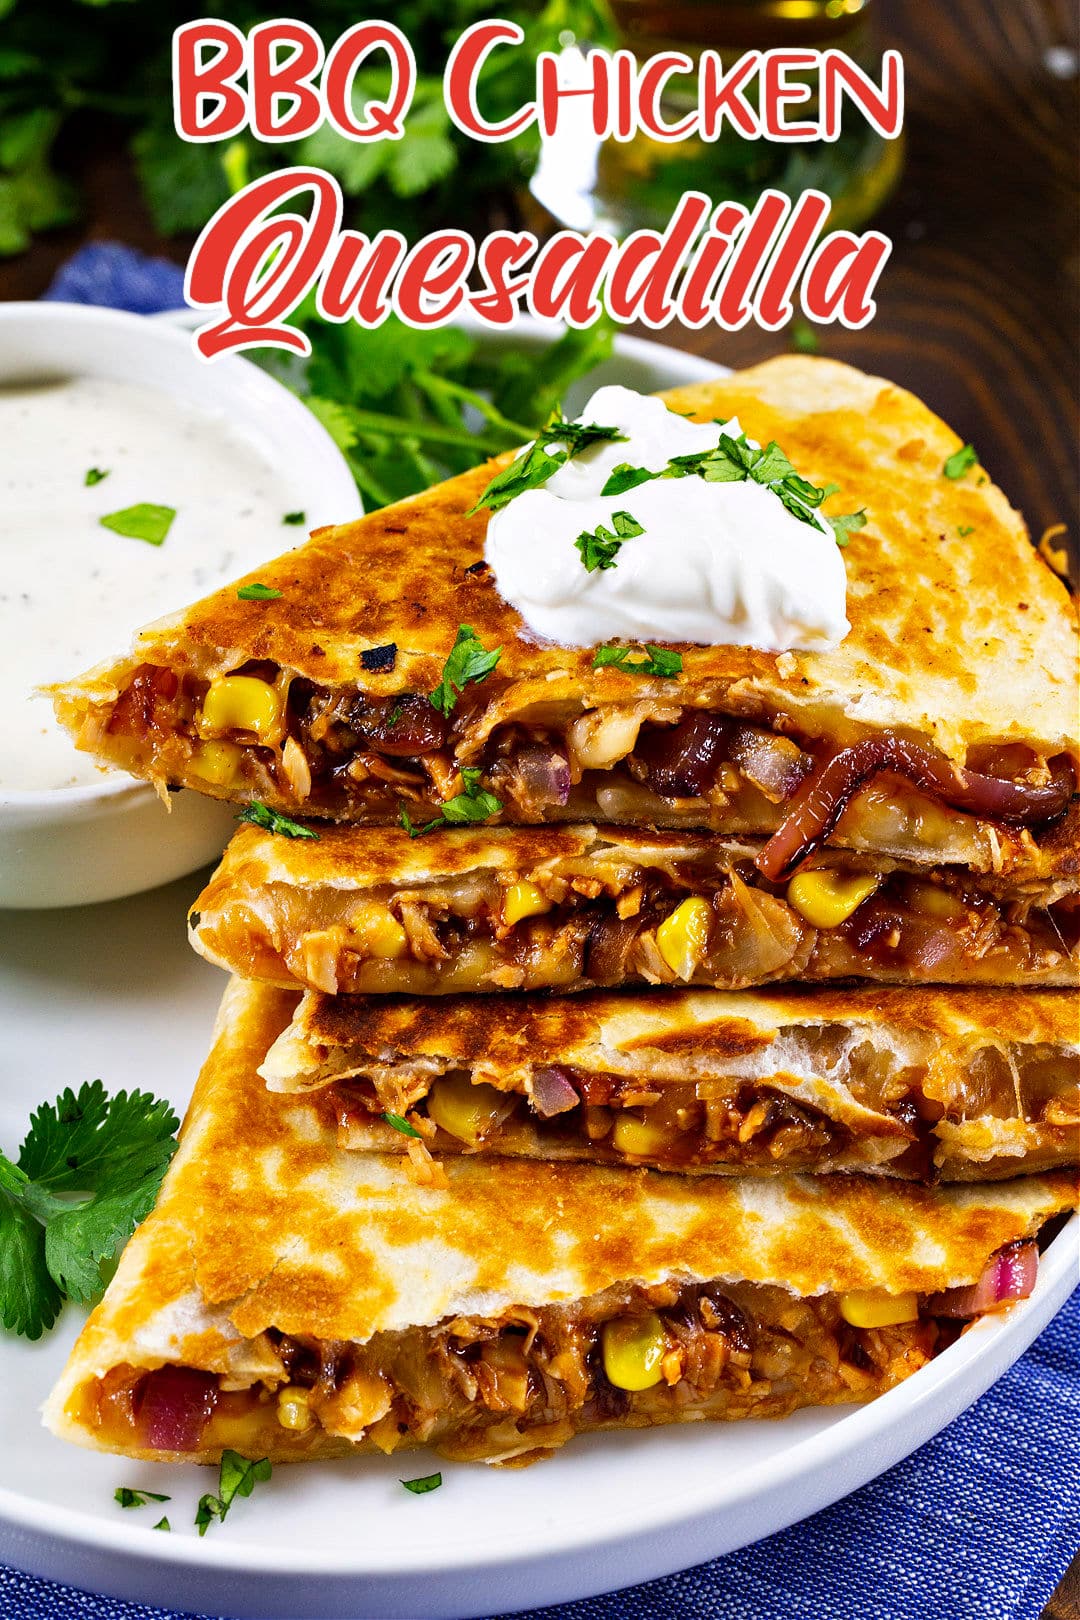 BBQ Chicken Quesadilla wedges piled on a plate.